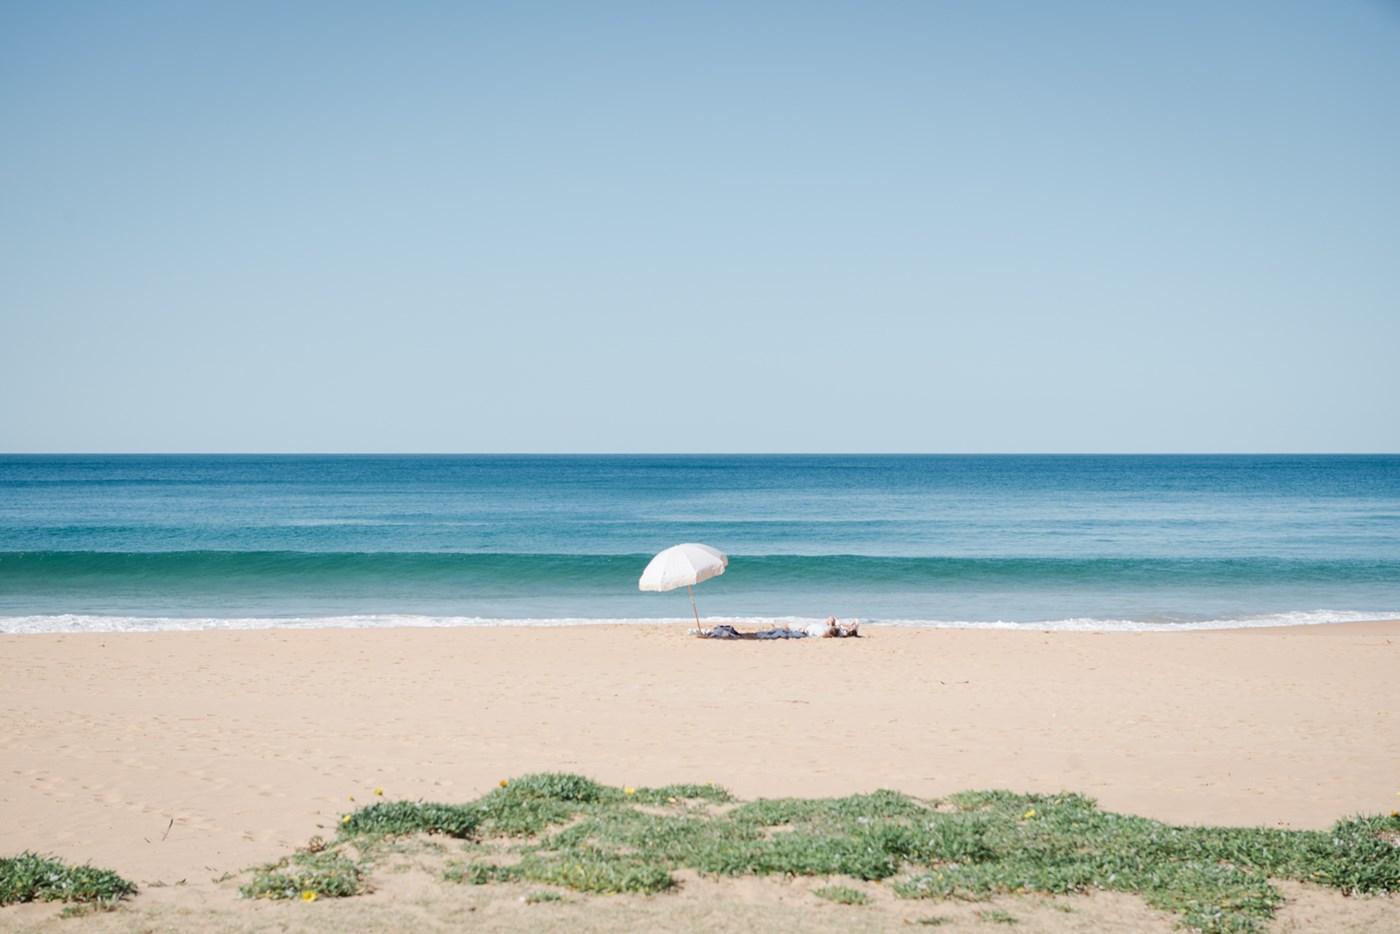 A lone beach umbrella and sunbather on the sand at Palm Beach NSW